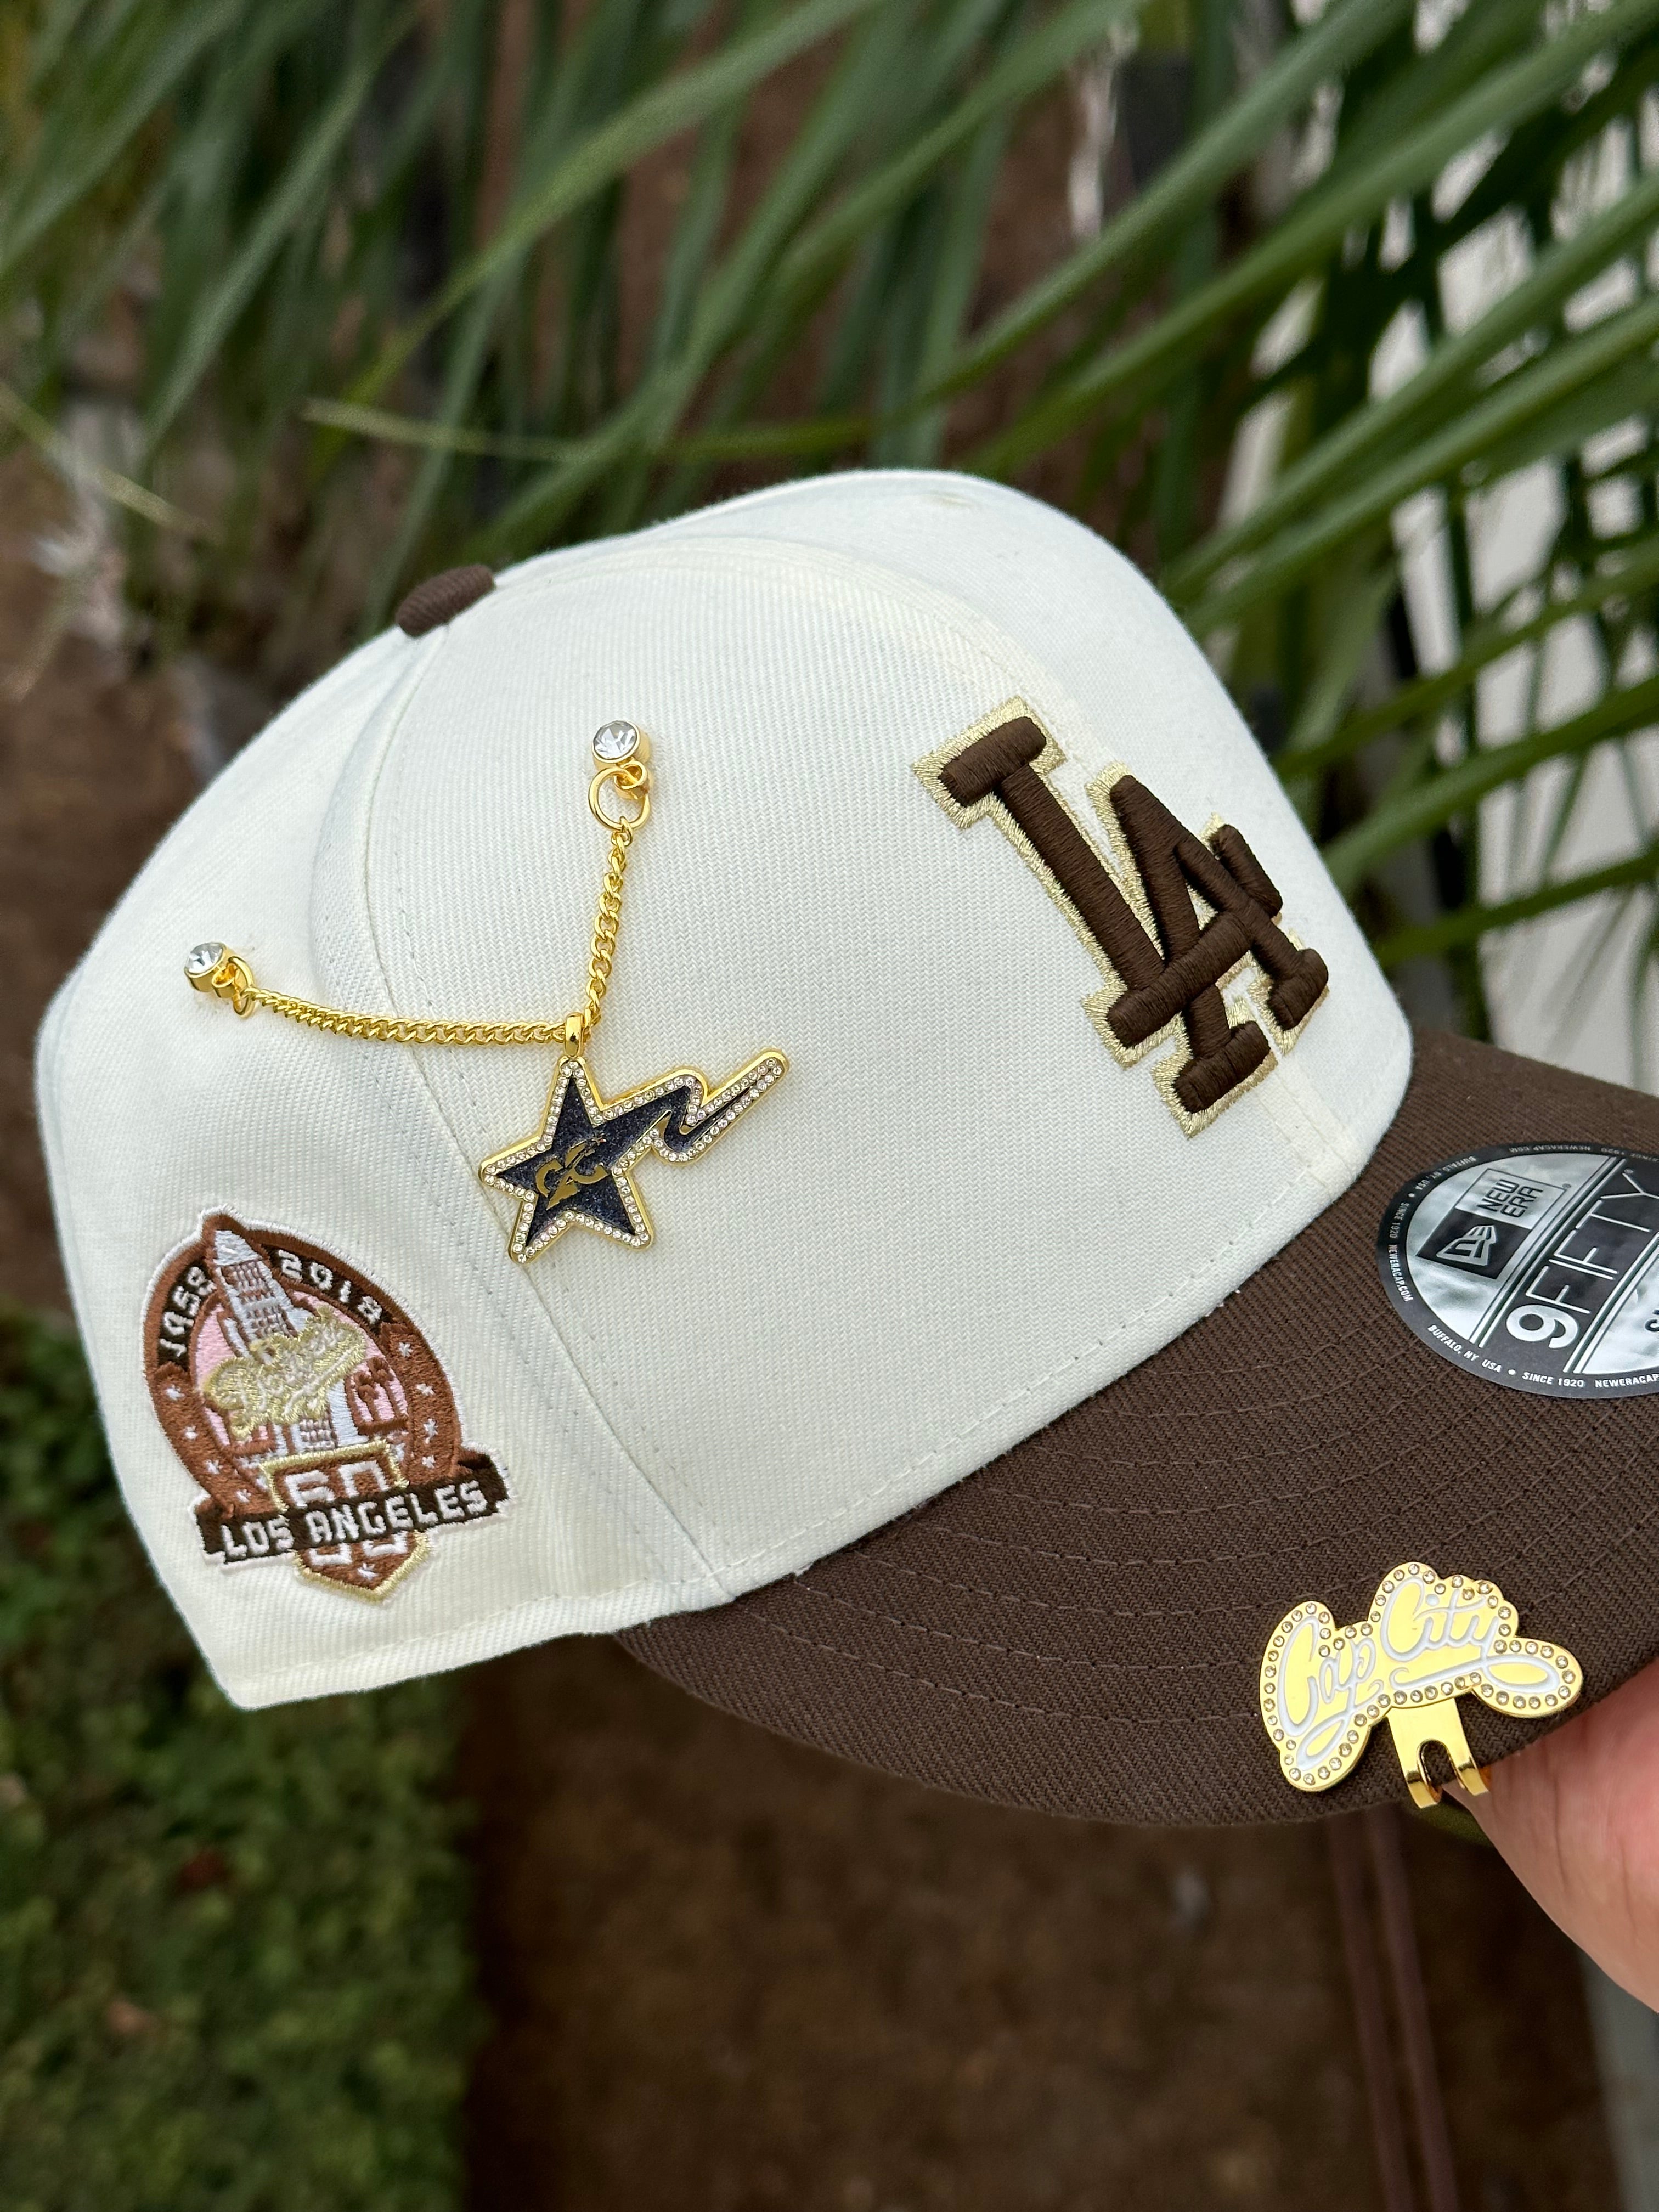 NEW ERA EXCLUSIVE 9FIFTY CHROME WHITE/WALNUT LOS ANGELES DODGERS SNAPBACK W/ 60TH ANNIVERSARY PATCH